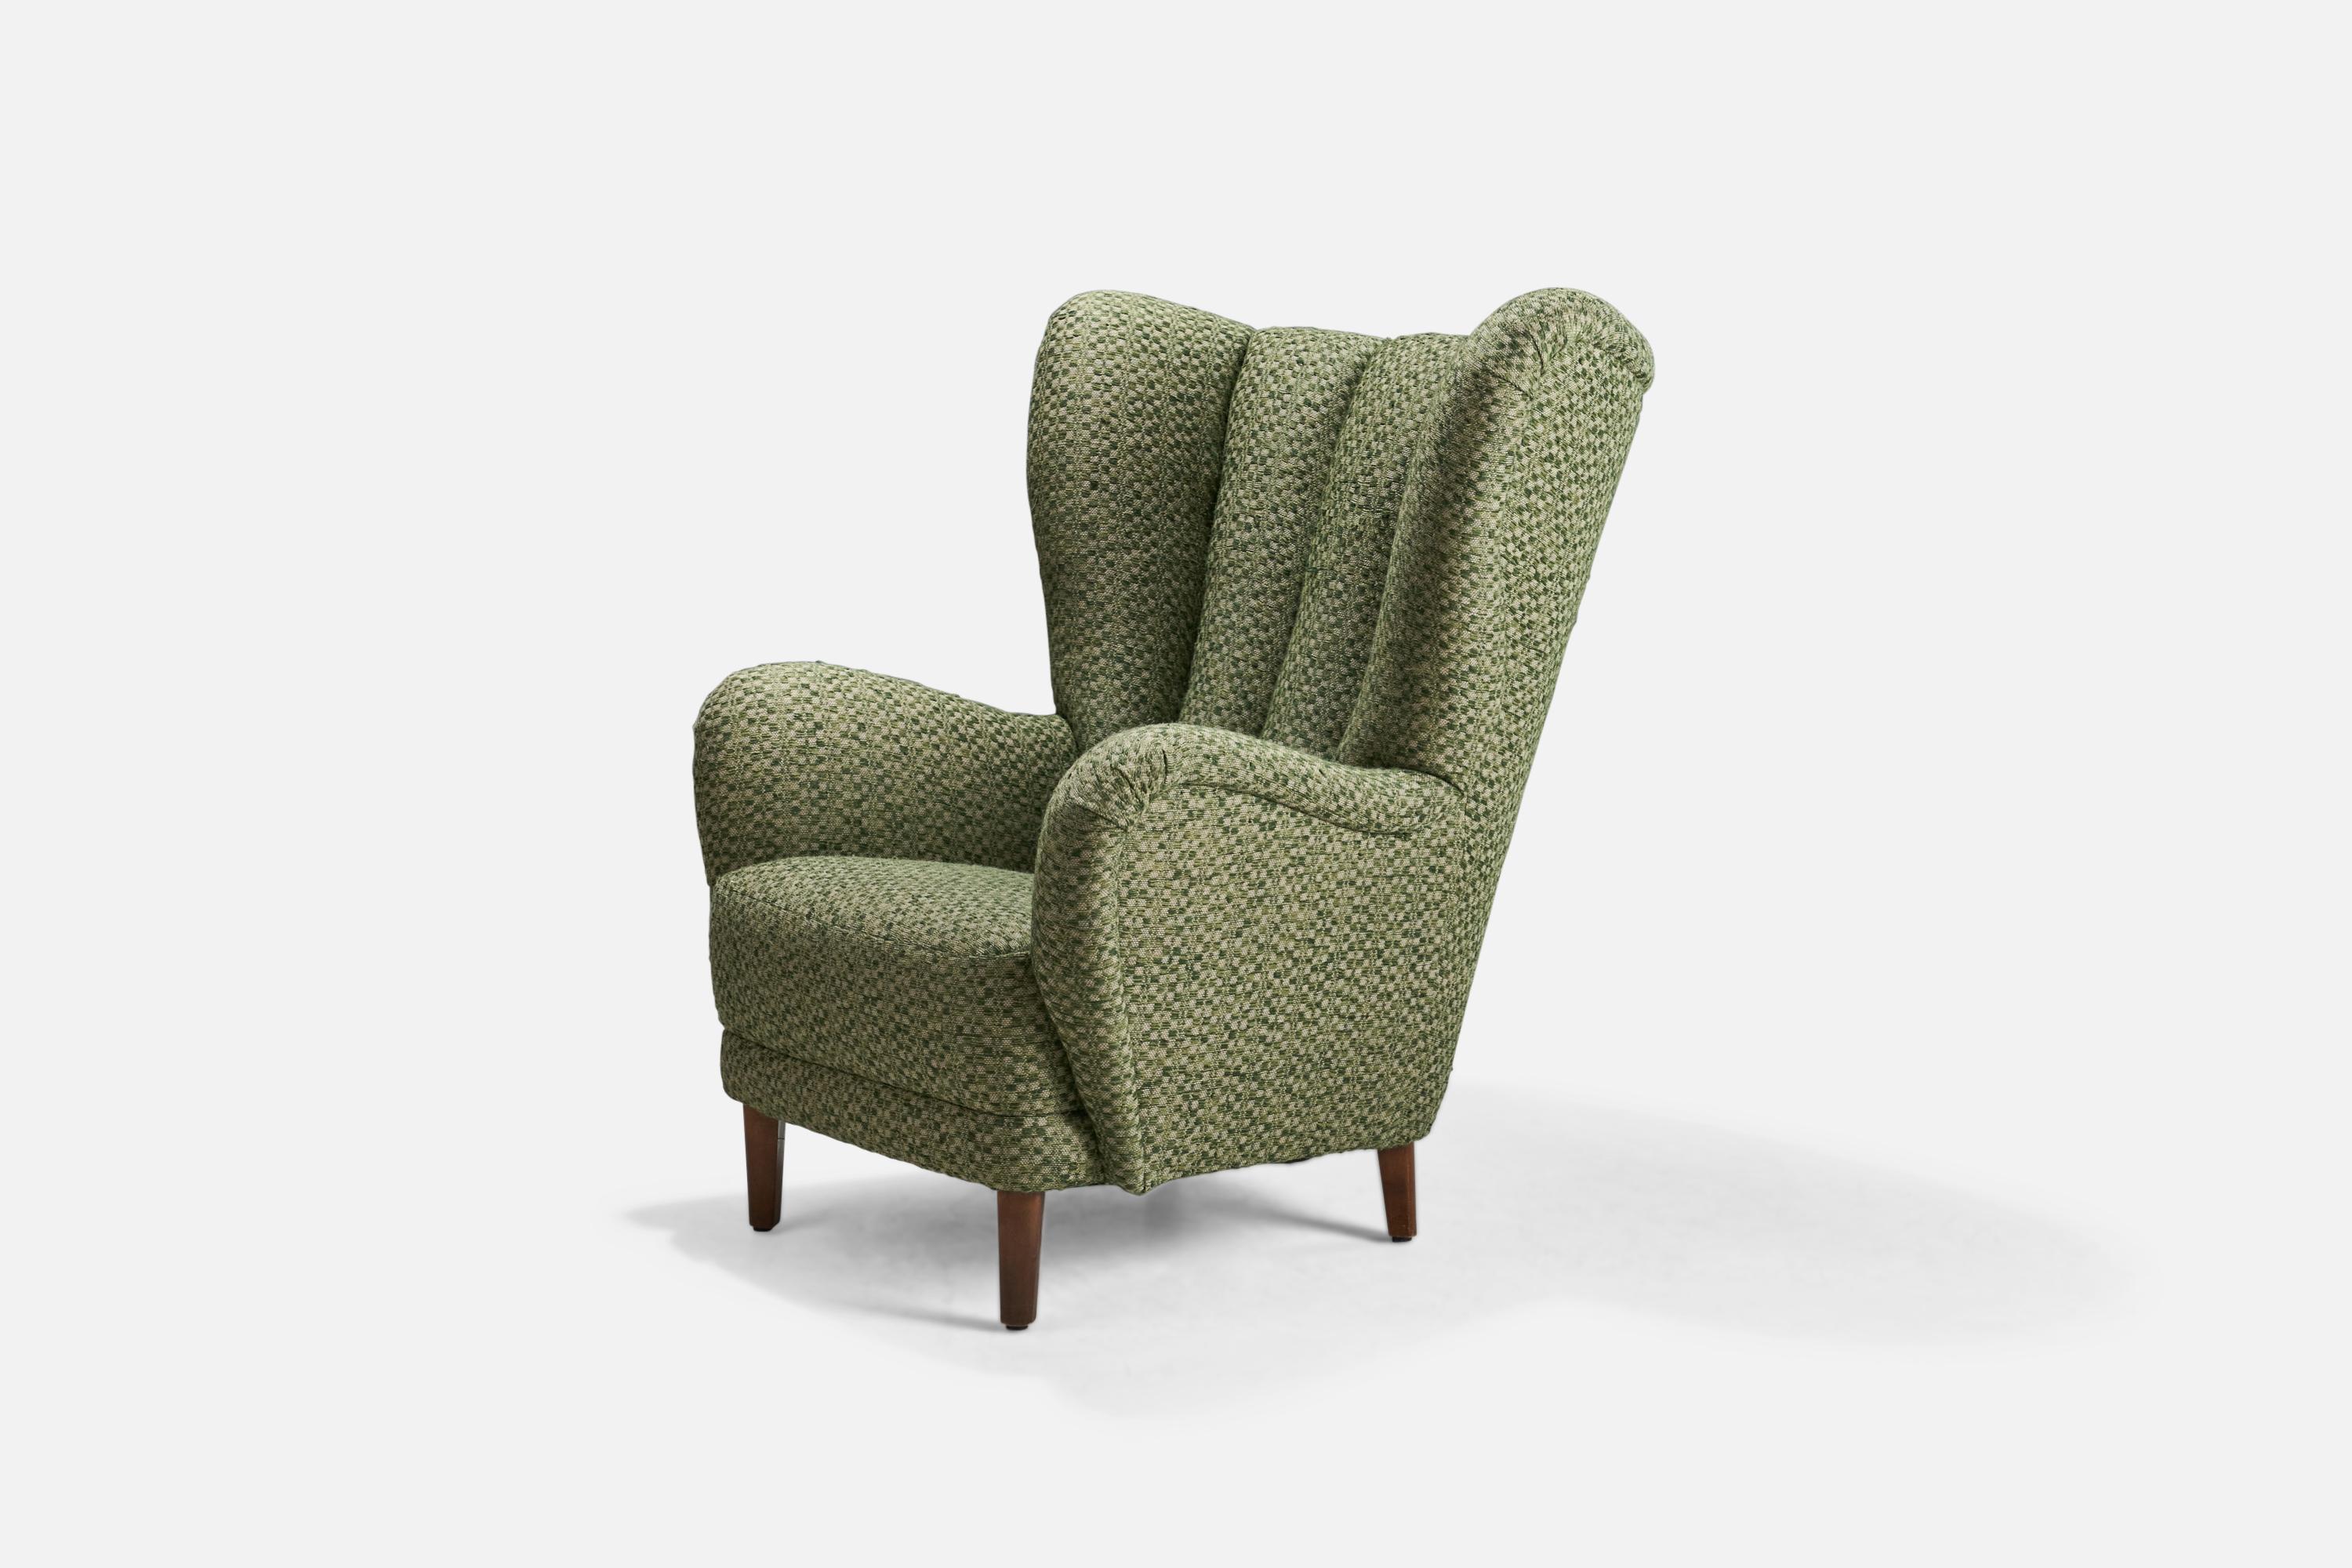 A green fabric and wood lounge chair designed and produced by a Danish Designer, Denmark, 1940s.